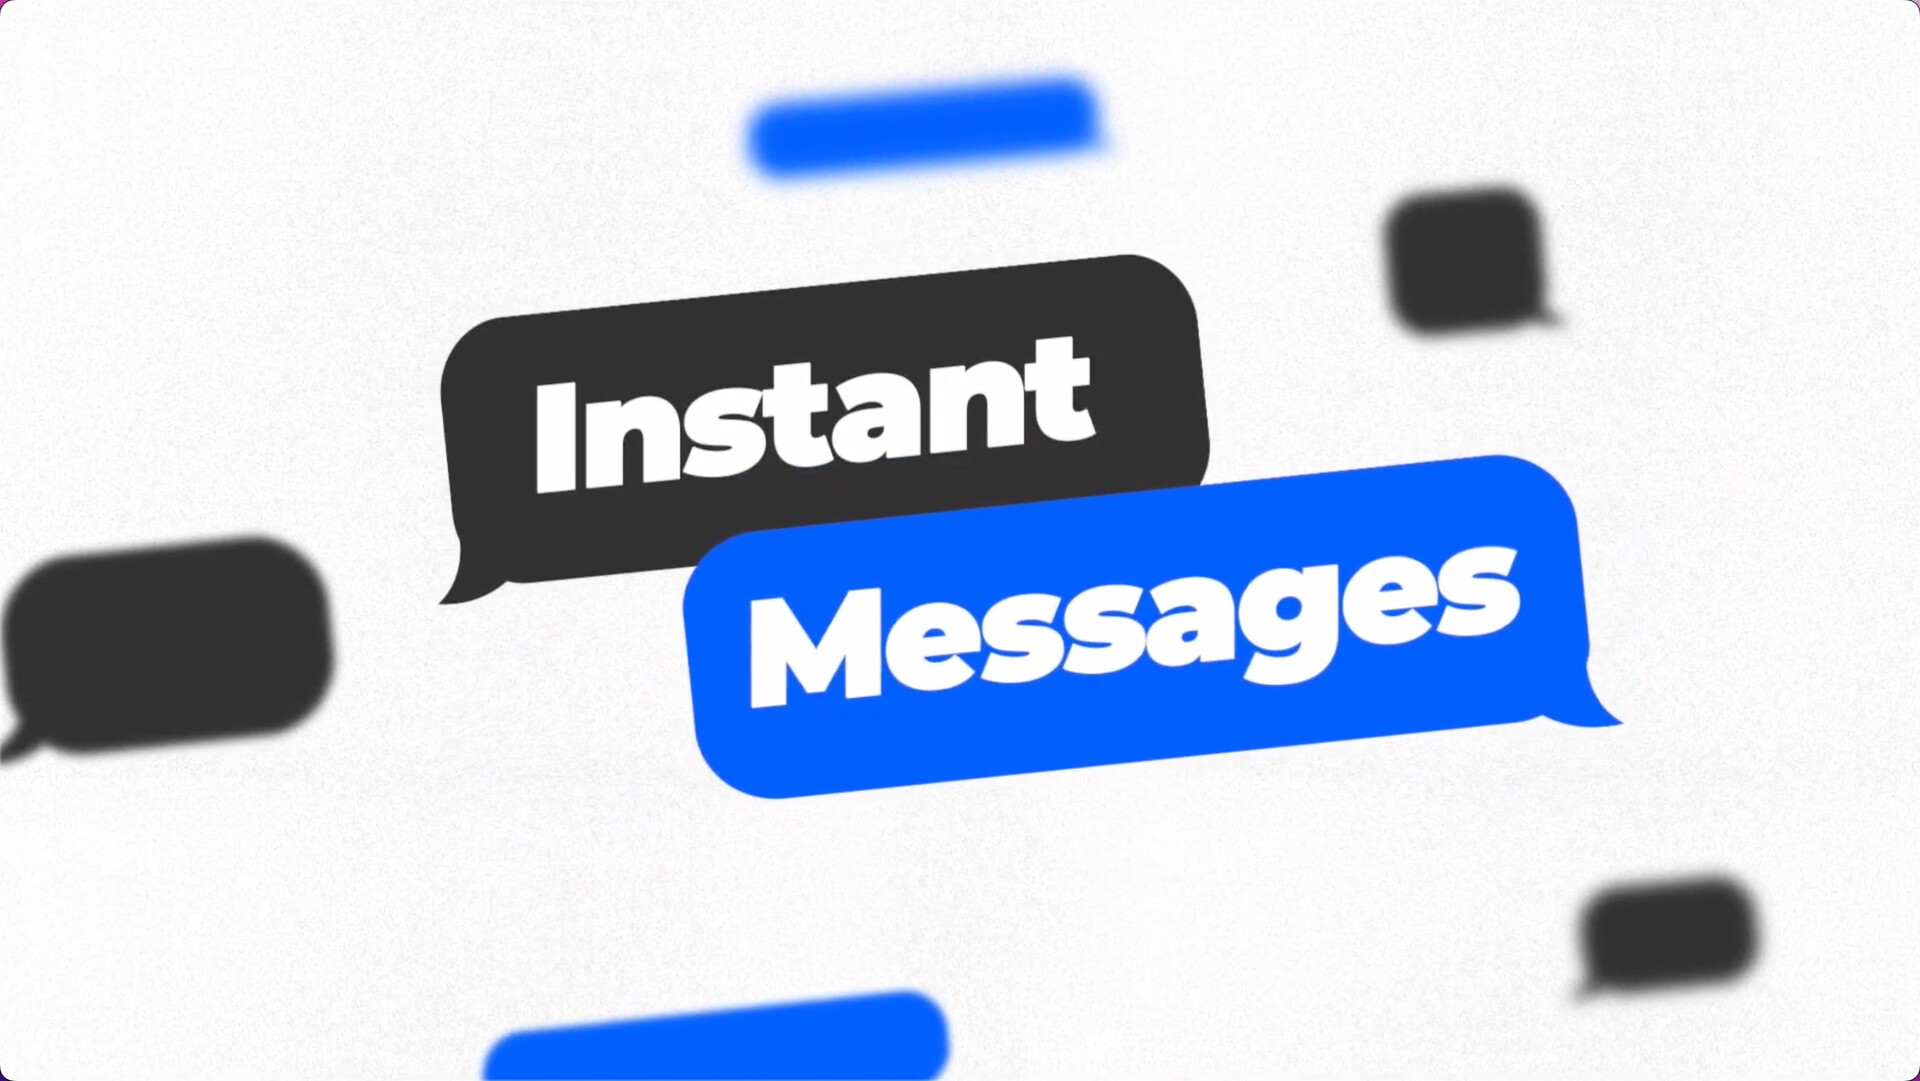 Fcpx插件：Instant Messages(聊天发帖模拟)